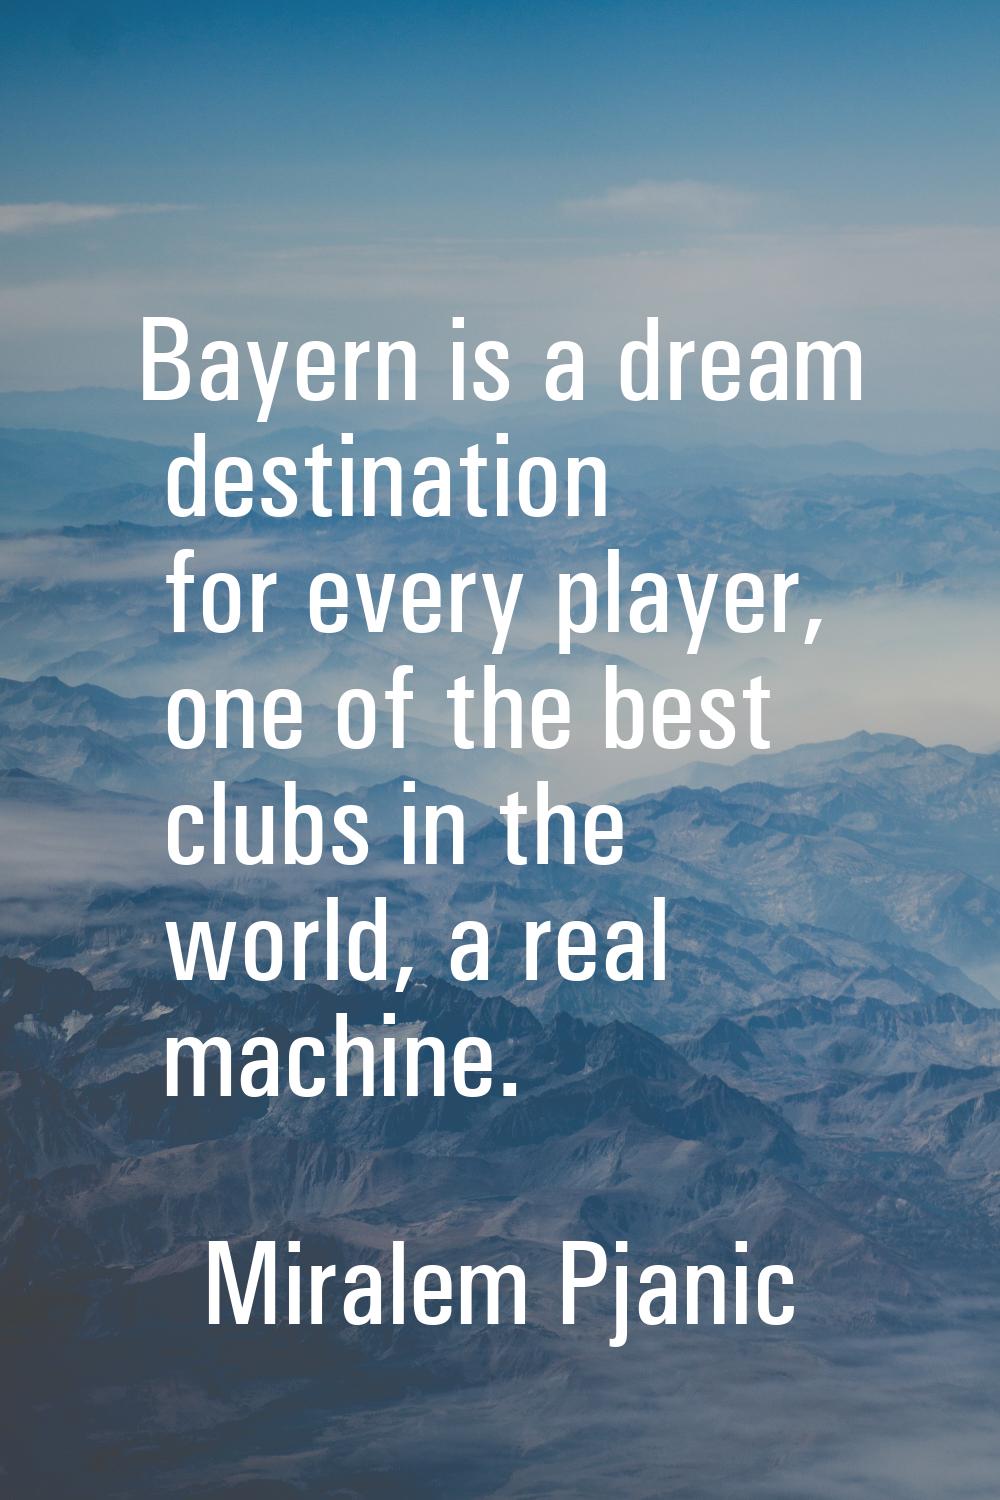 Bayern is a dream destination for every player, one of the best clubs in the world, a real machine.